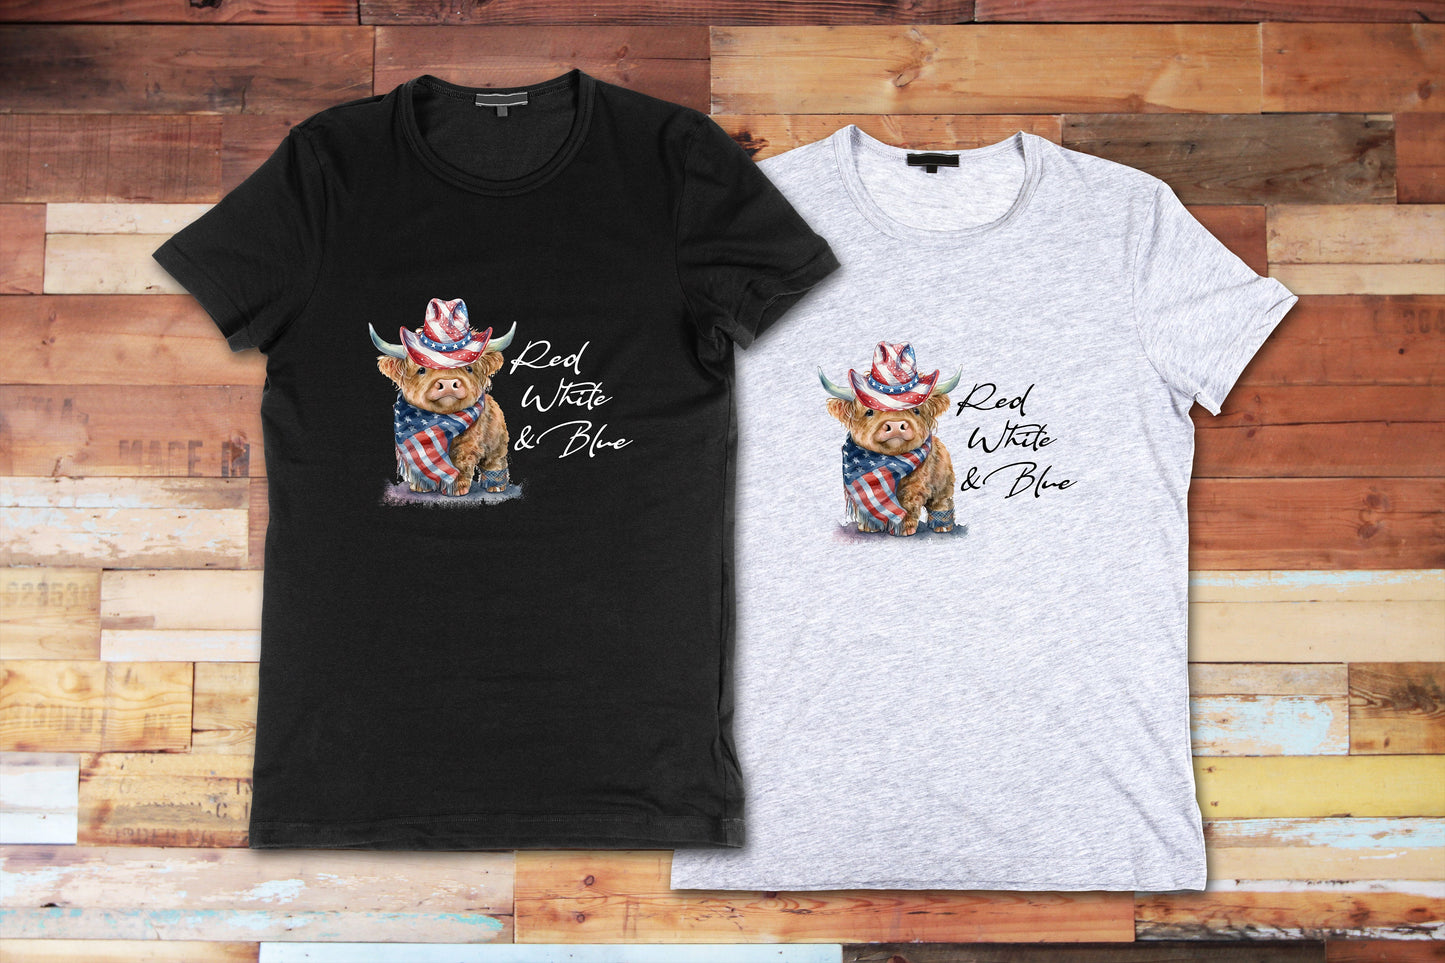 Red White and Blue Highland Cow Tshirt, T Shirt, Patriotic, American Flag Tshirt, Graphic T's  100% Cotton Black White or Gray, Tee